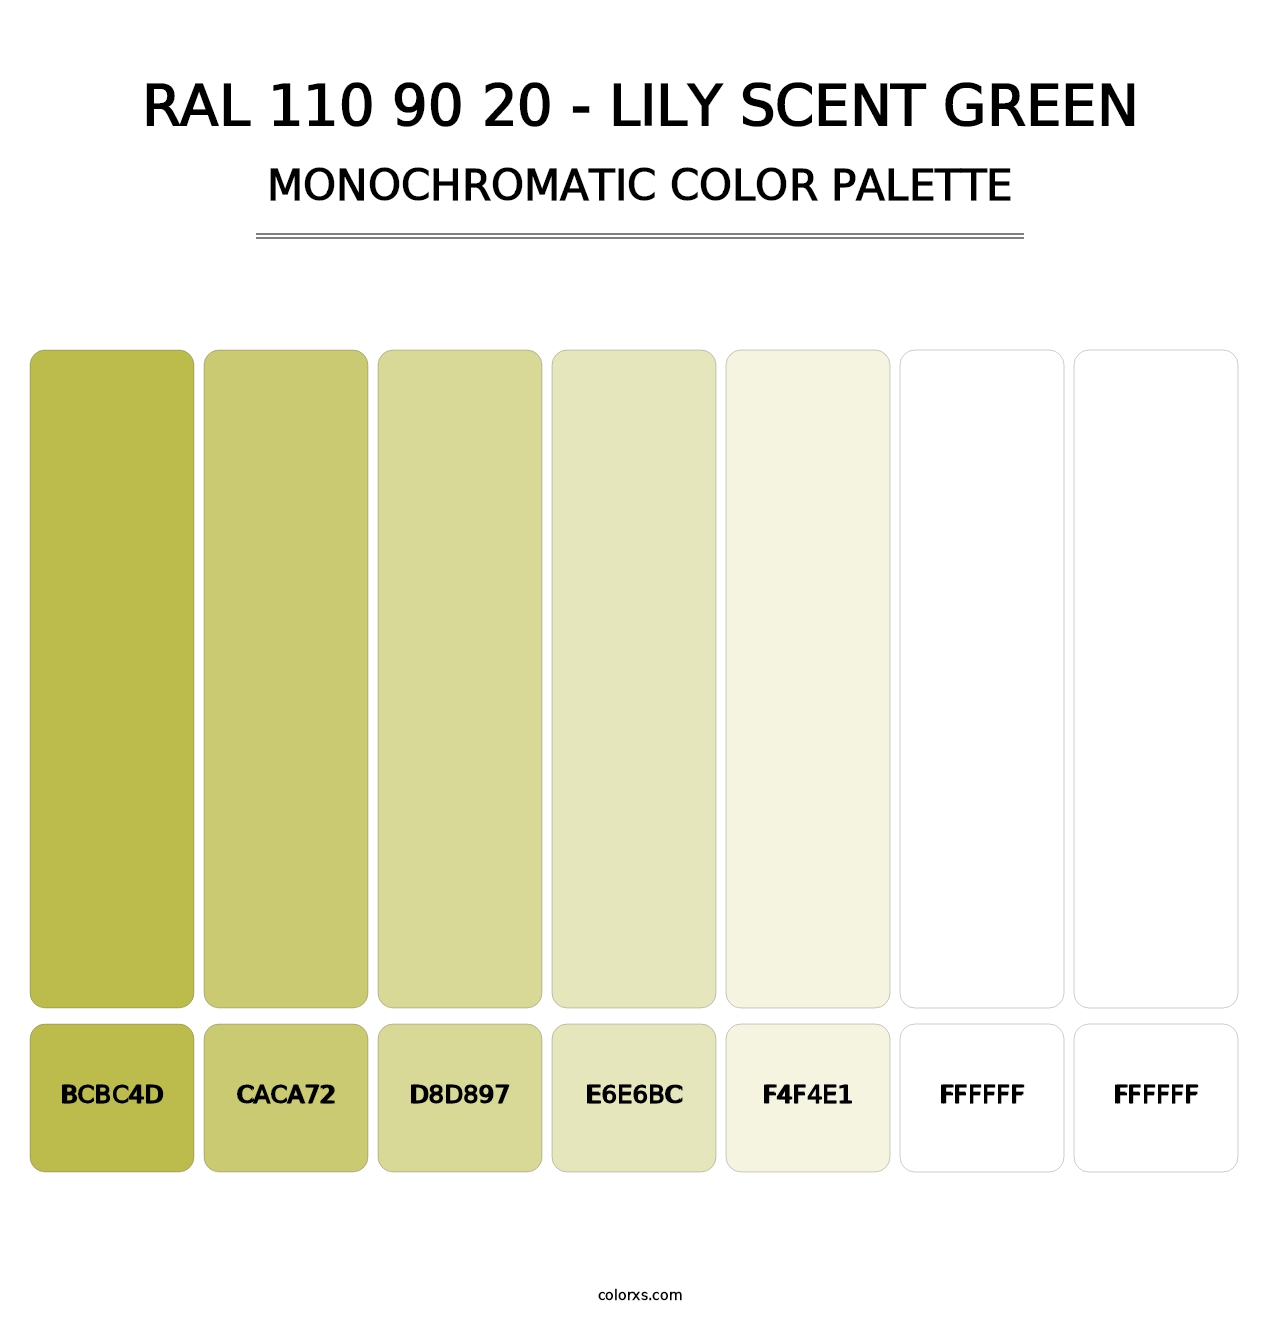 RAL 110 90 20 - Lily Scent Green - Monochromatic Color Palette